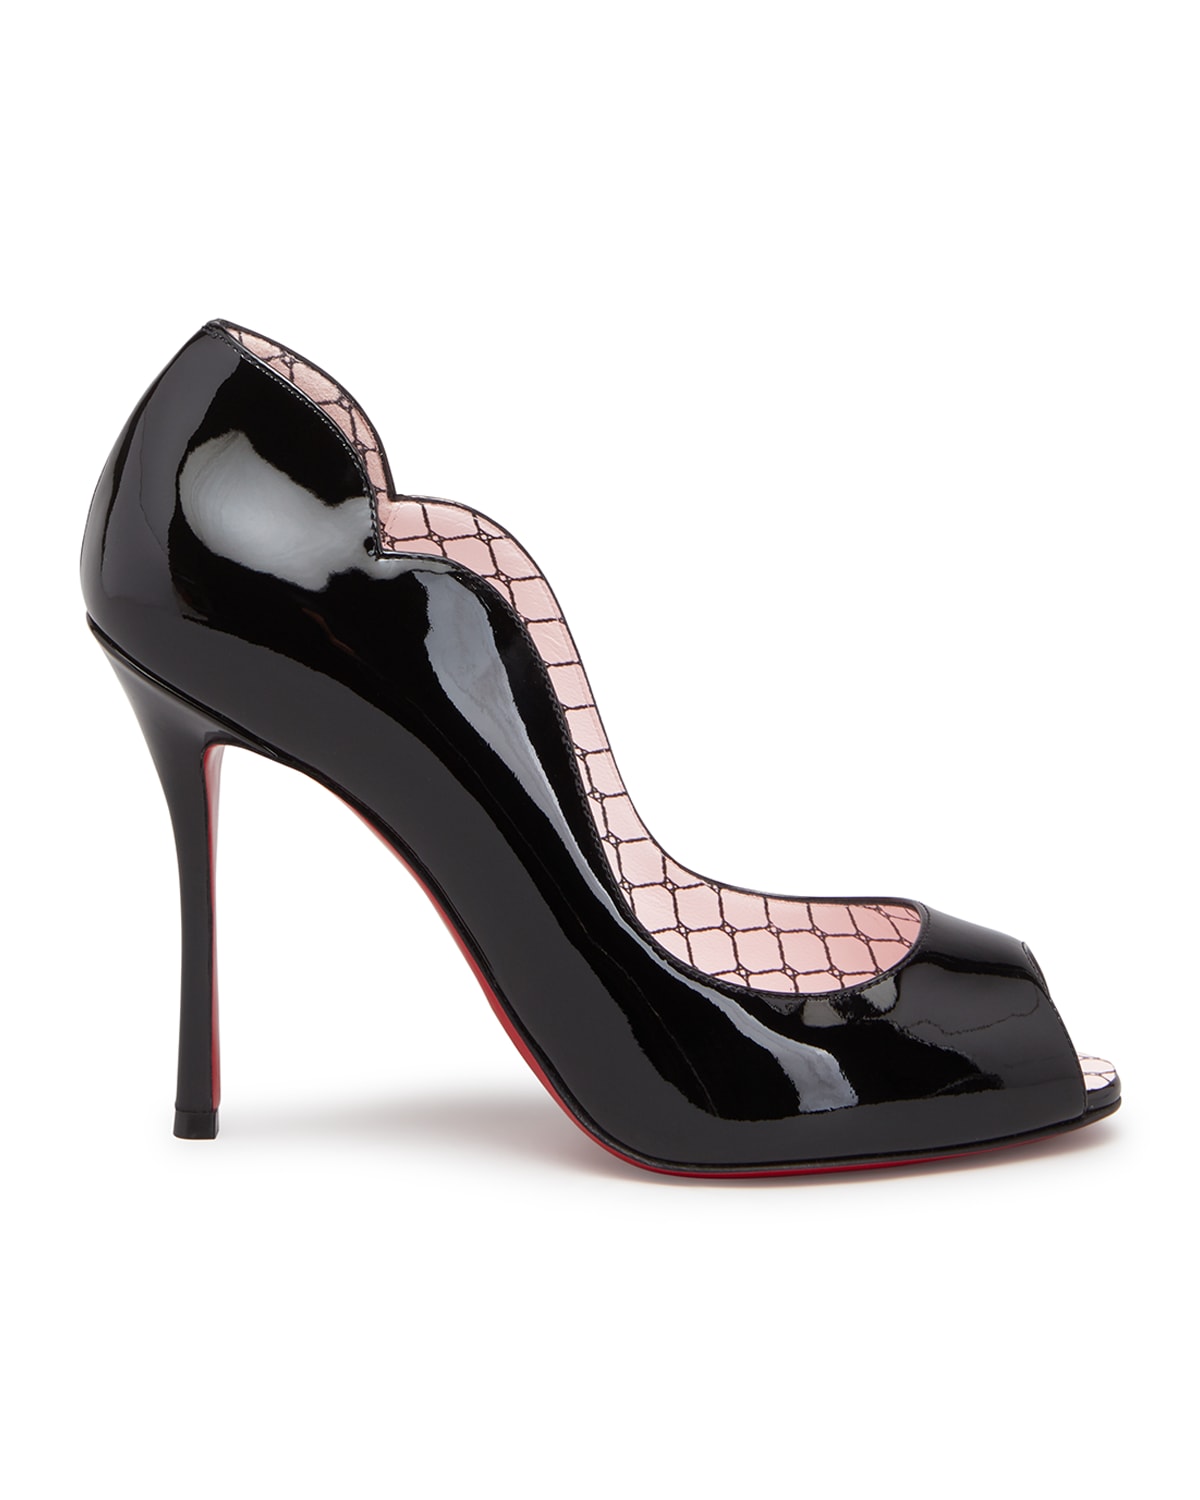 Christian Louboutin Chick Up Red Sole Pumps | Neiman Marcus